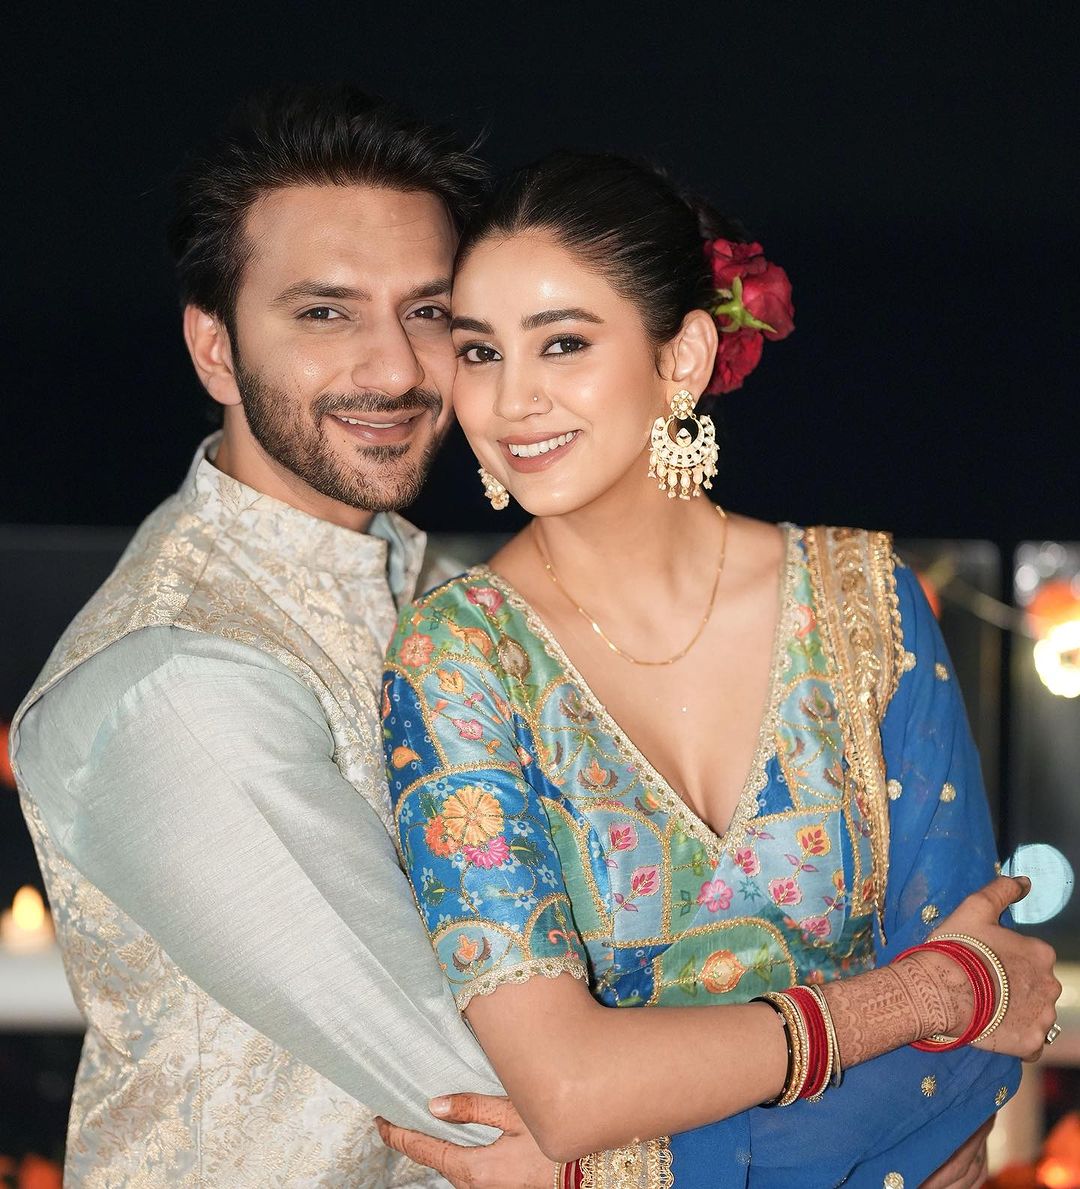 Actor Ali Merchant And His Wife Andleeb Zaidi Changed Their Honeymoon Trip. They Plan To Visit Lakshadweep Island In the Future